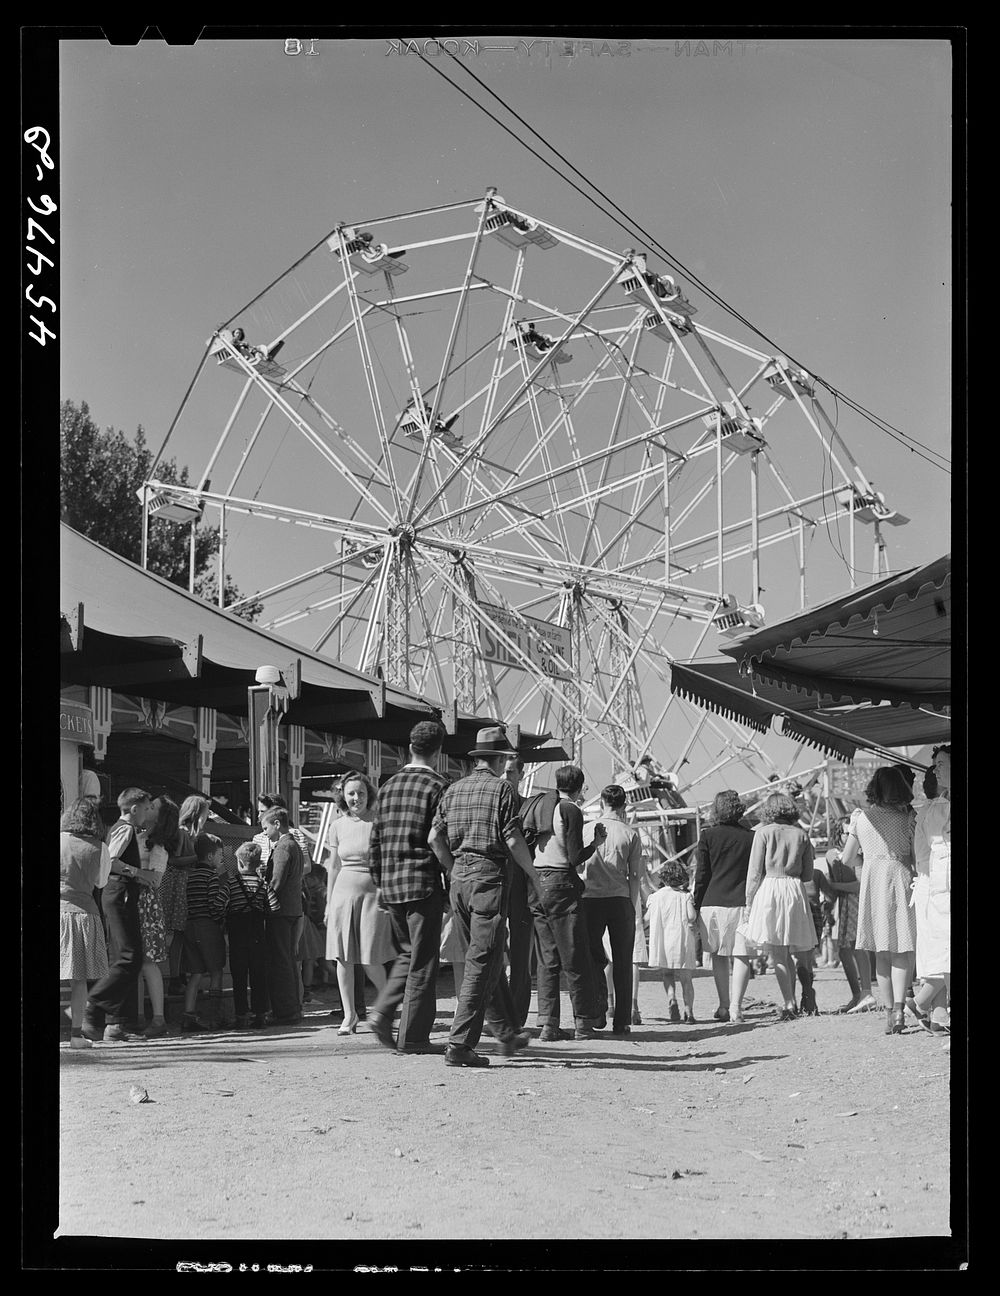 [Untitled photo, possibly related to: At the Rutland Fair, Vermont]. Sourced from the Library of Congress.